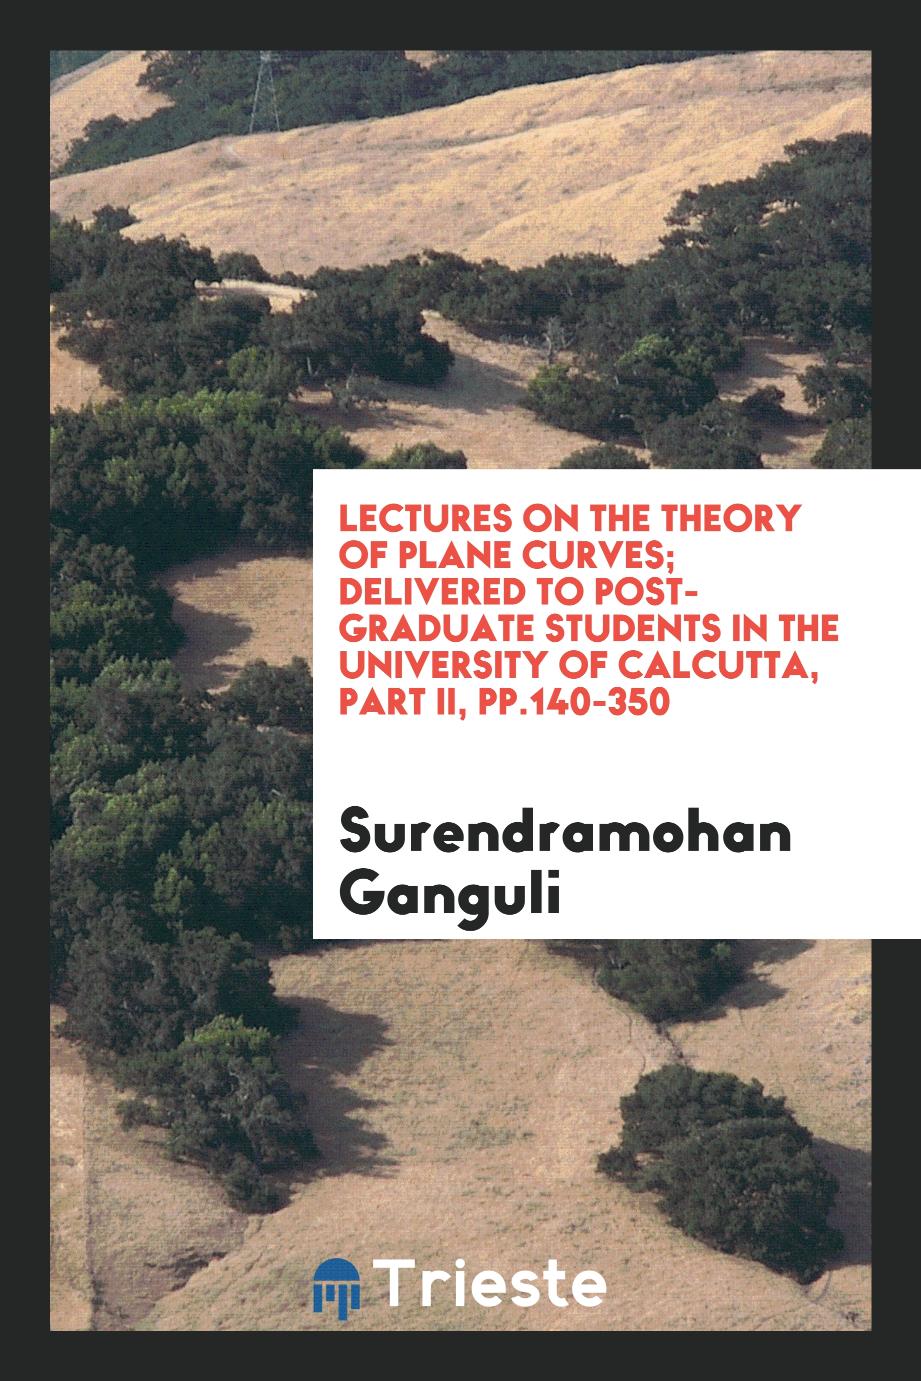 Lectures on the theory of plane curves; delivered to post-graduate students in the University of Calcutta, Part II, pp.140-350